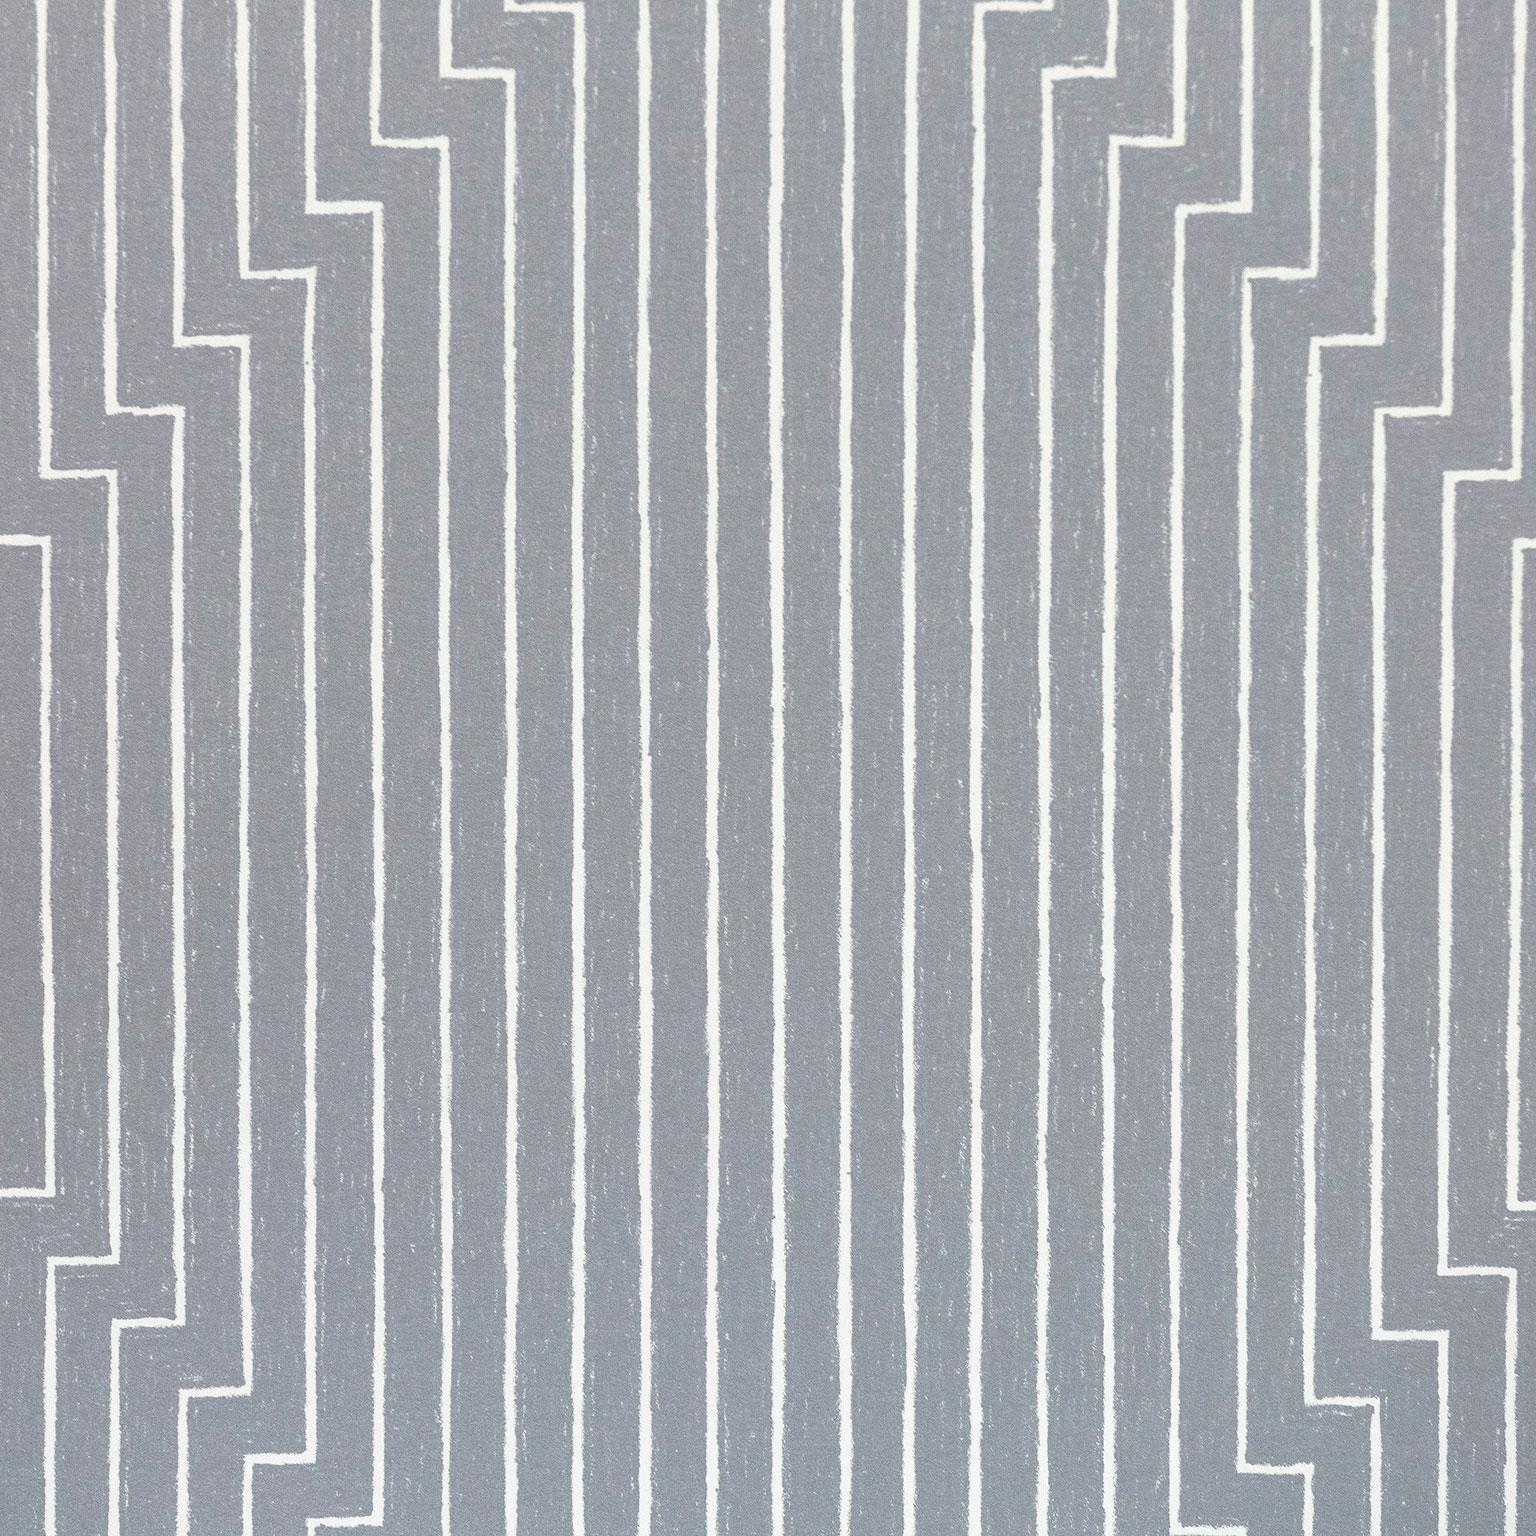 If one is interested in Frank Stella's association with Op Art, his hypnotic and minimal 